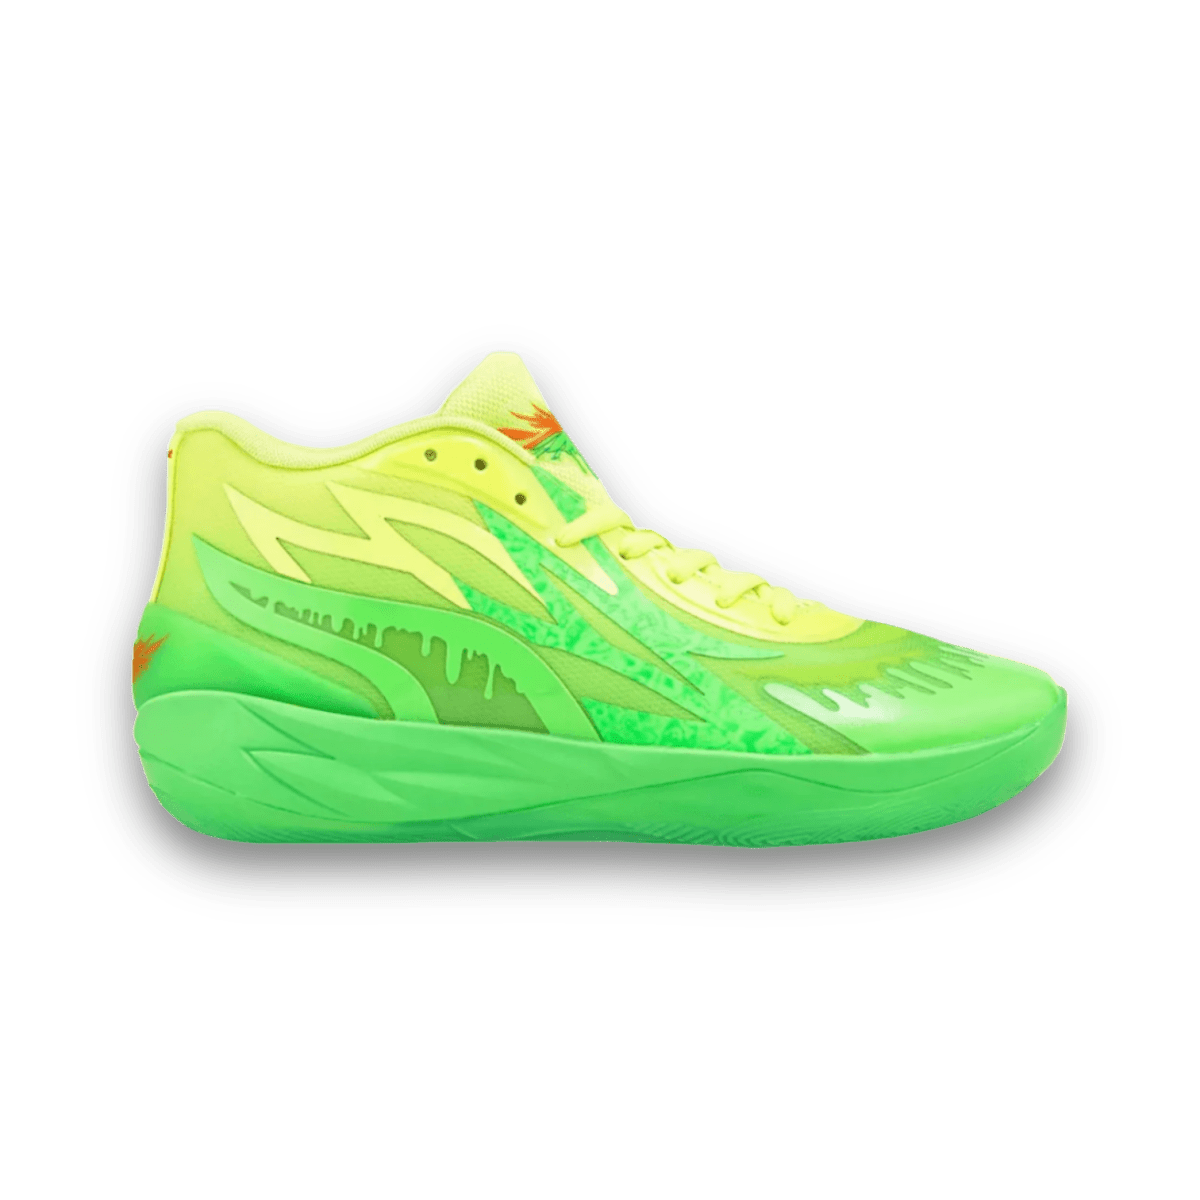 Puma LaMelo Ball Nickelodeon x MB.02 'Slime' - Jawns on Fire Sneakers